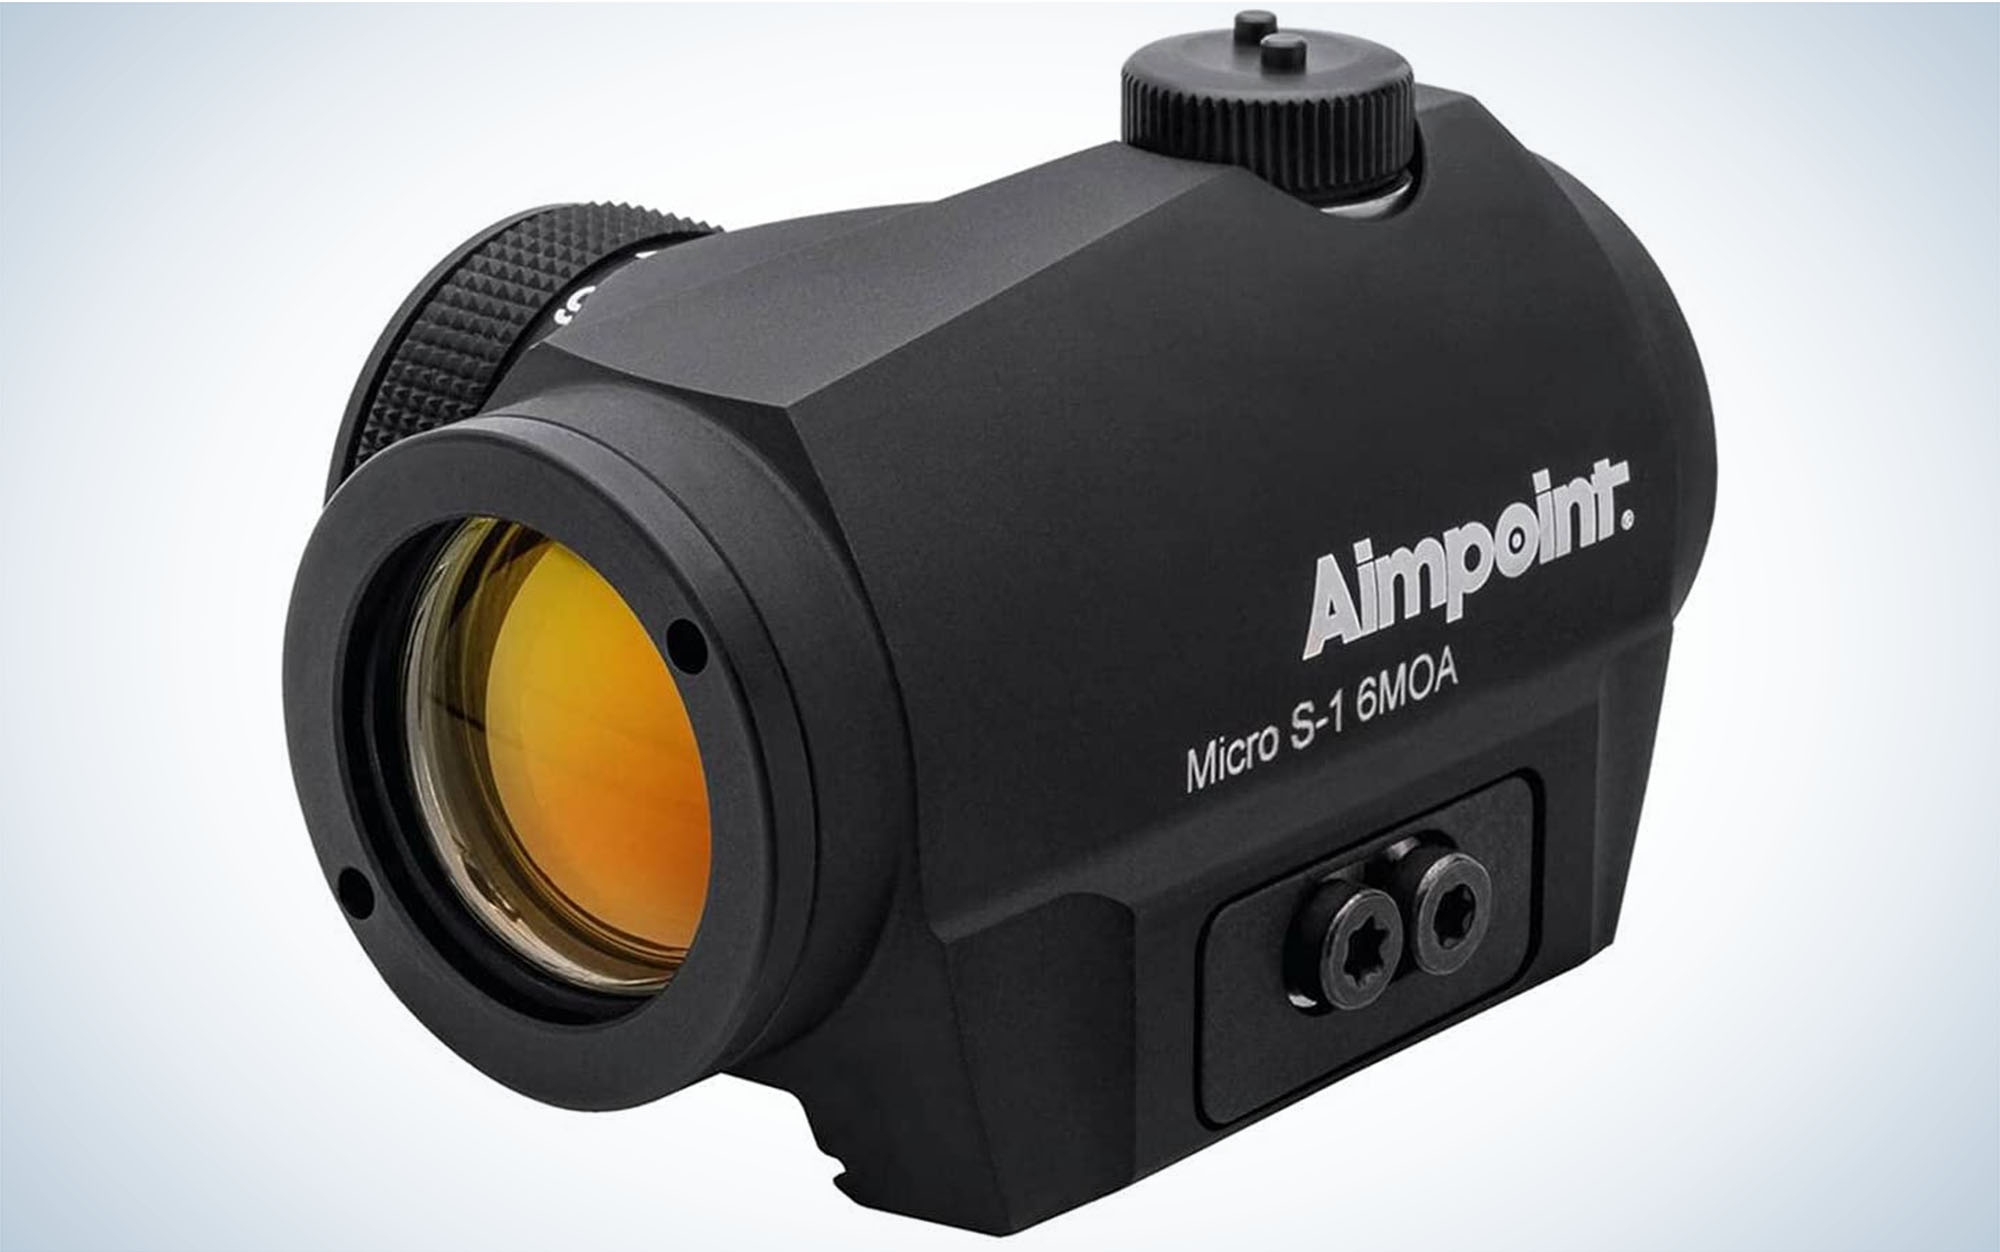 The Aimpoint Micro S-1 is best for mounting without a rail.